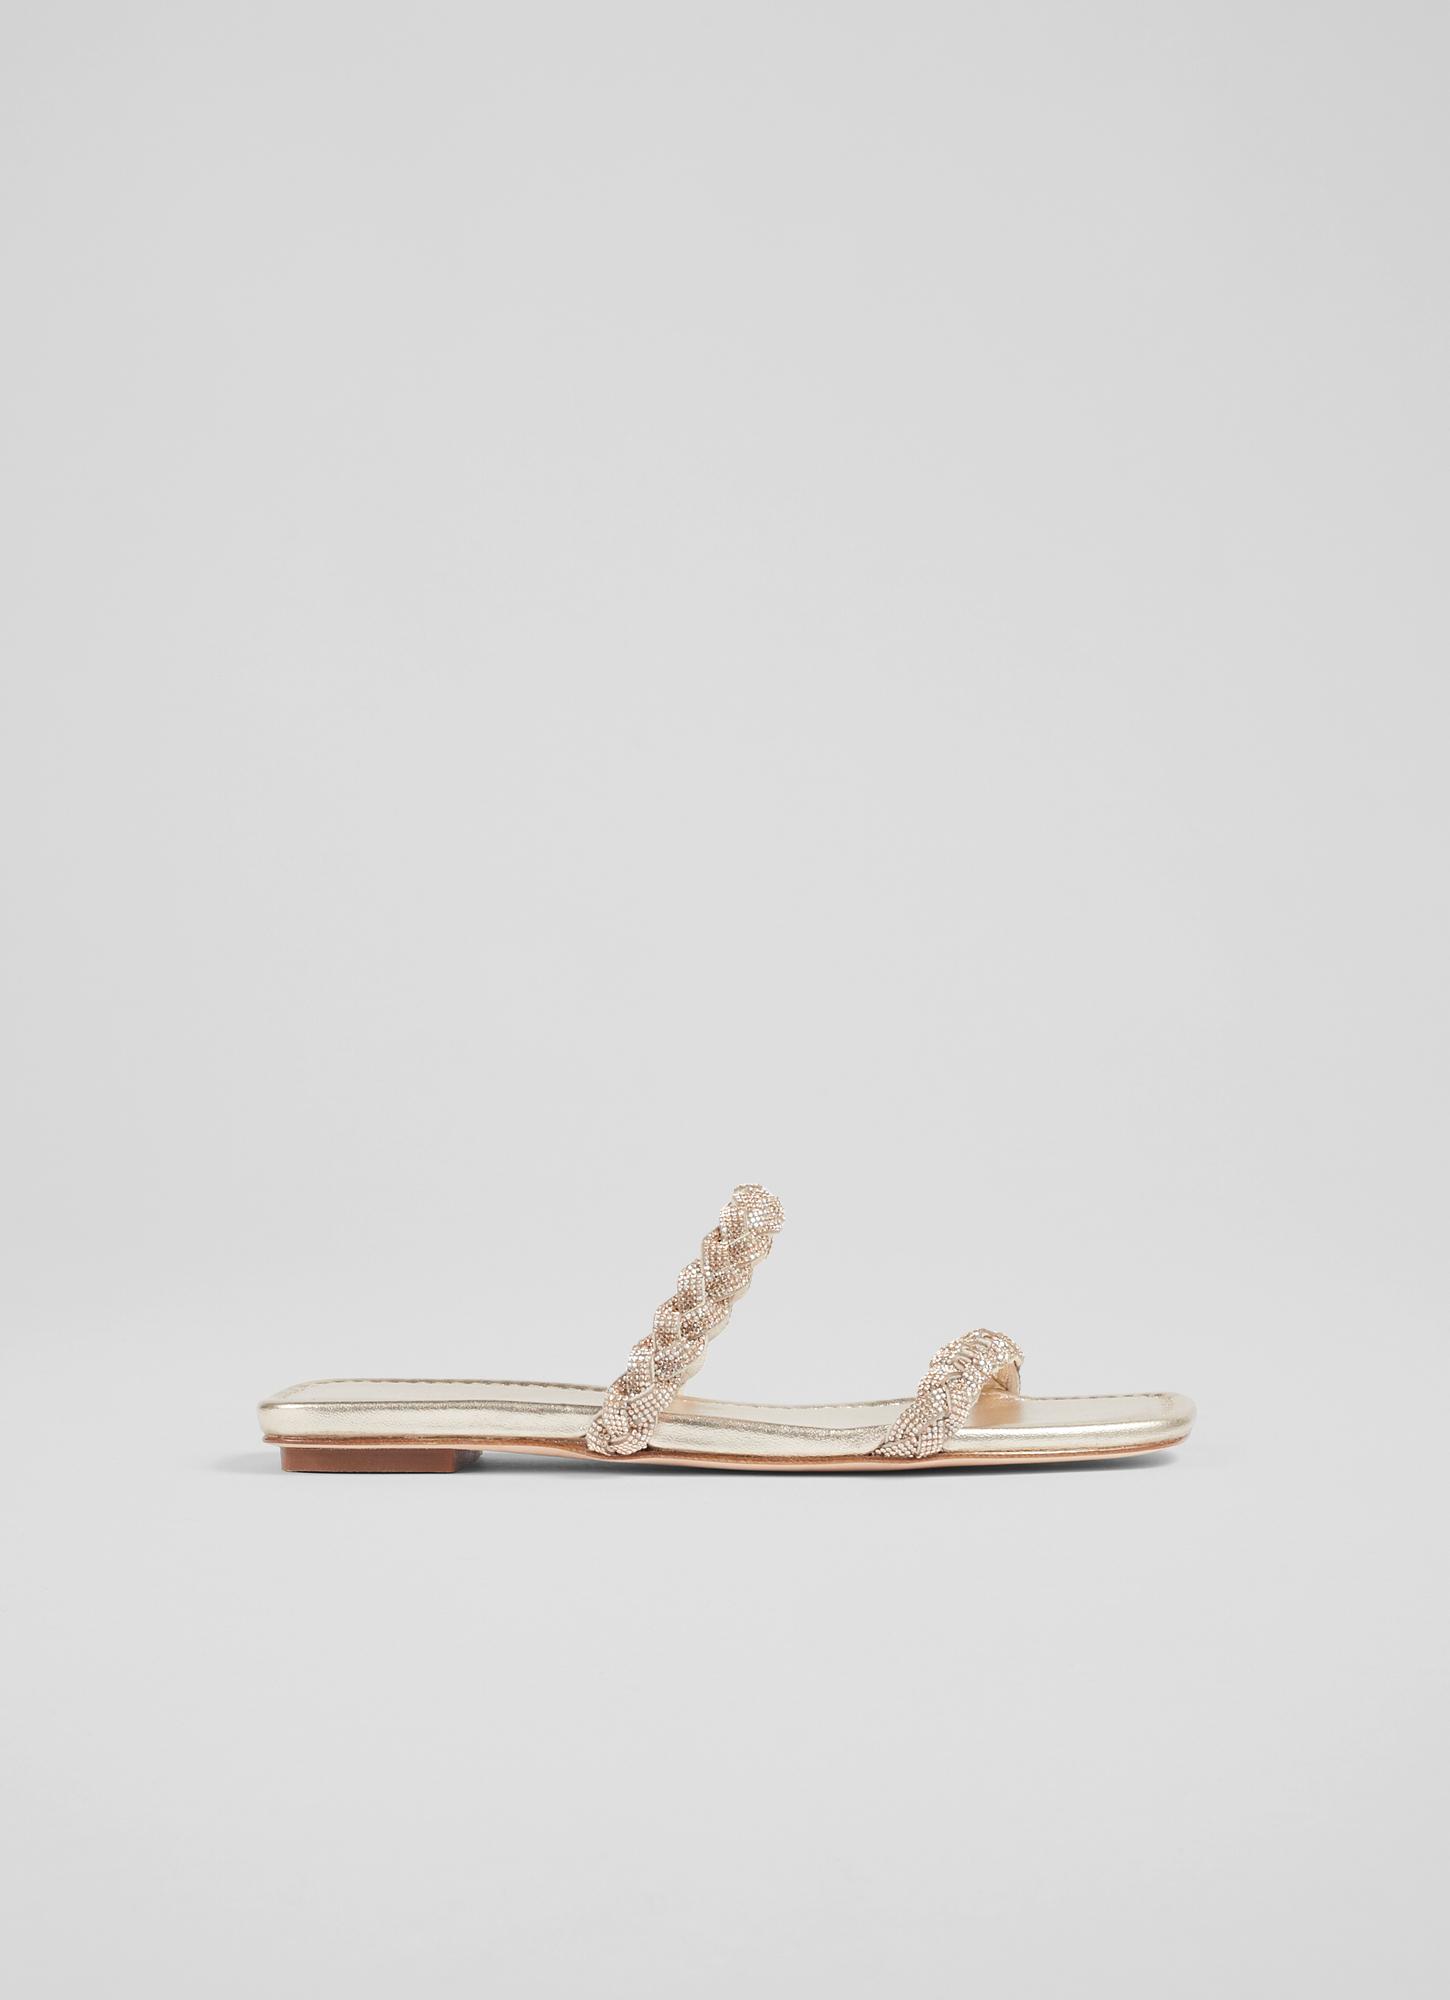 L.K.Bennett Ria Gold Leather and Crystal Plaited Flat Sandals, Gold